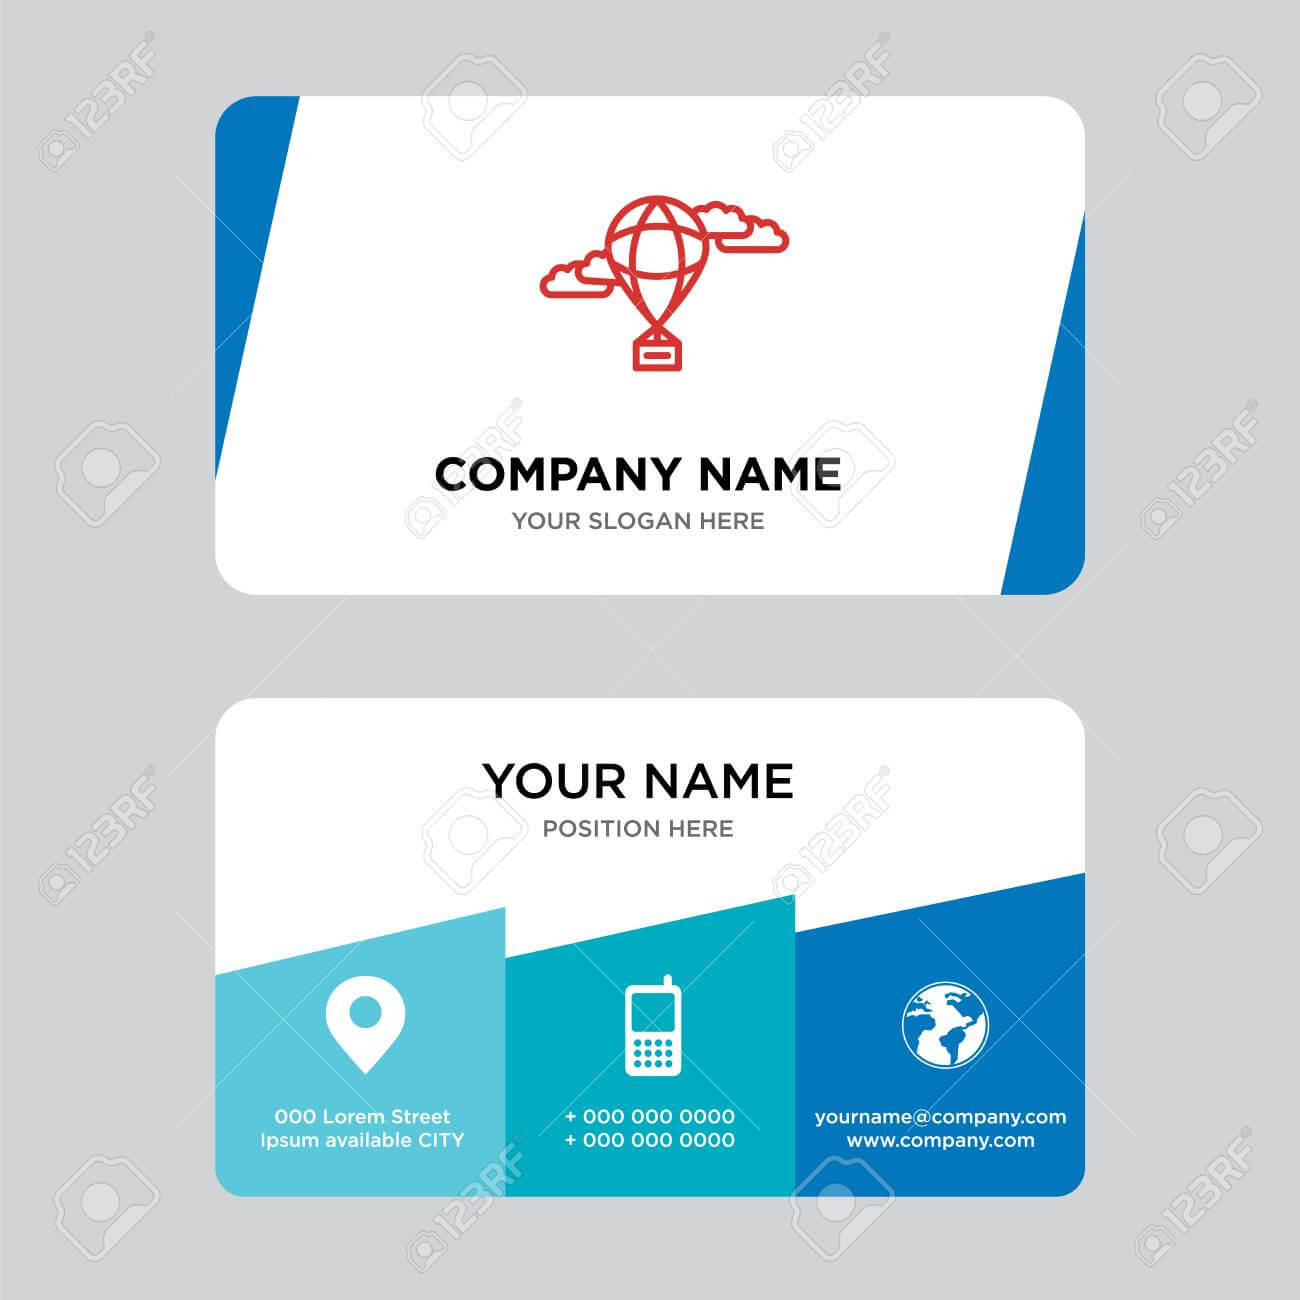 Hot Air Balloon Business Card Design Template, Visiting For Your Company,  Modern Creative And Clean Identity Card Vector Illustration With Company Id Card Design Template